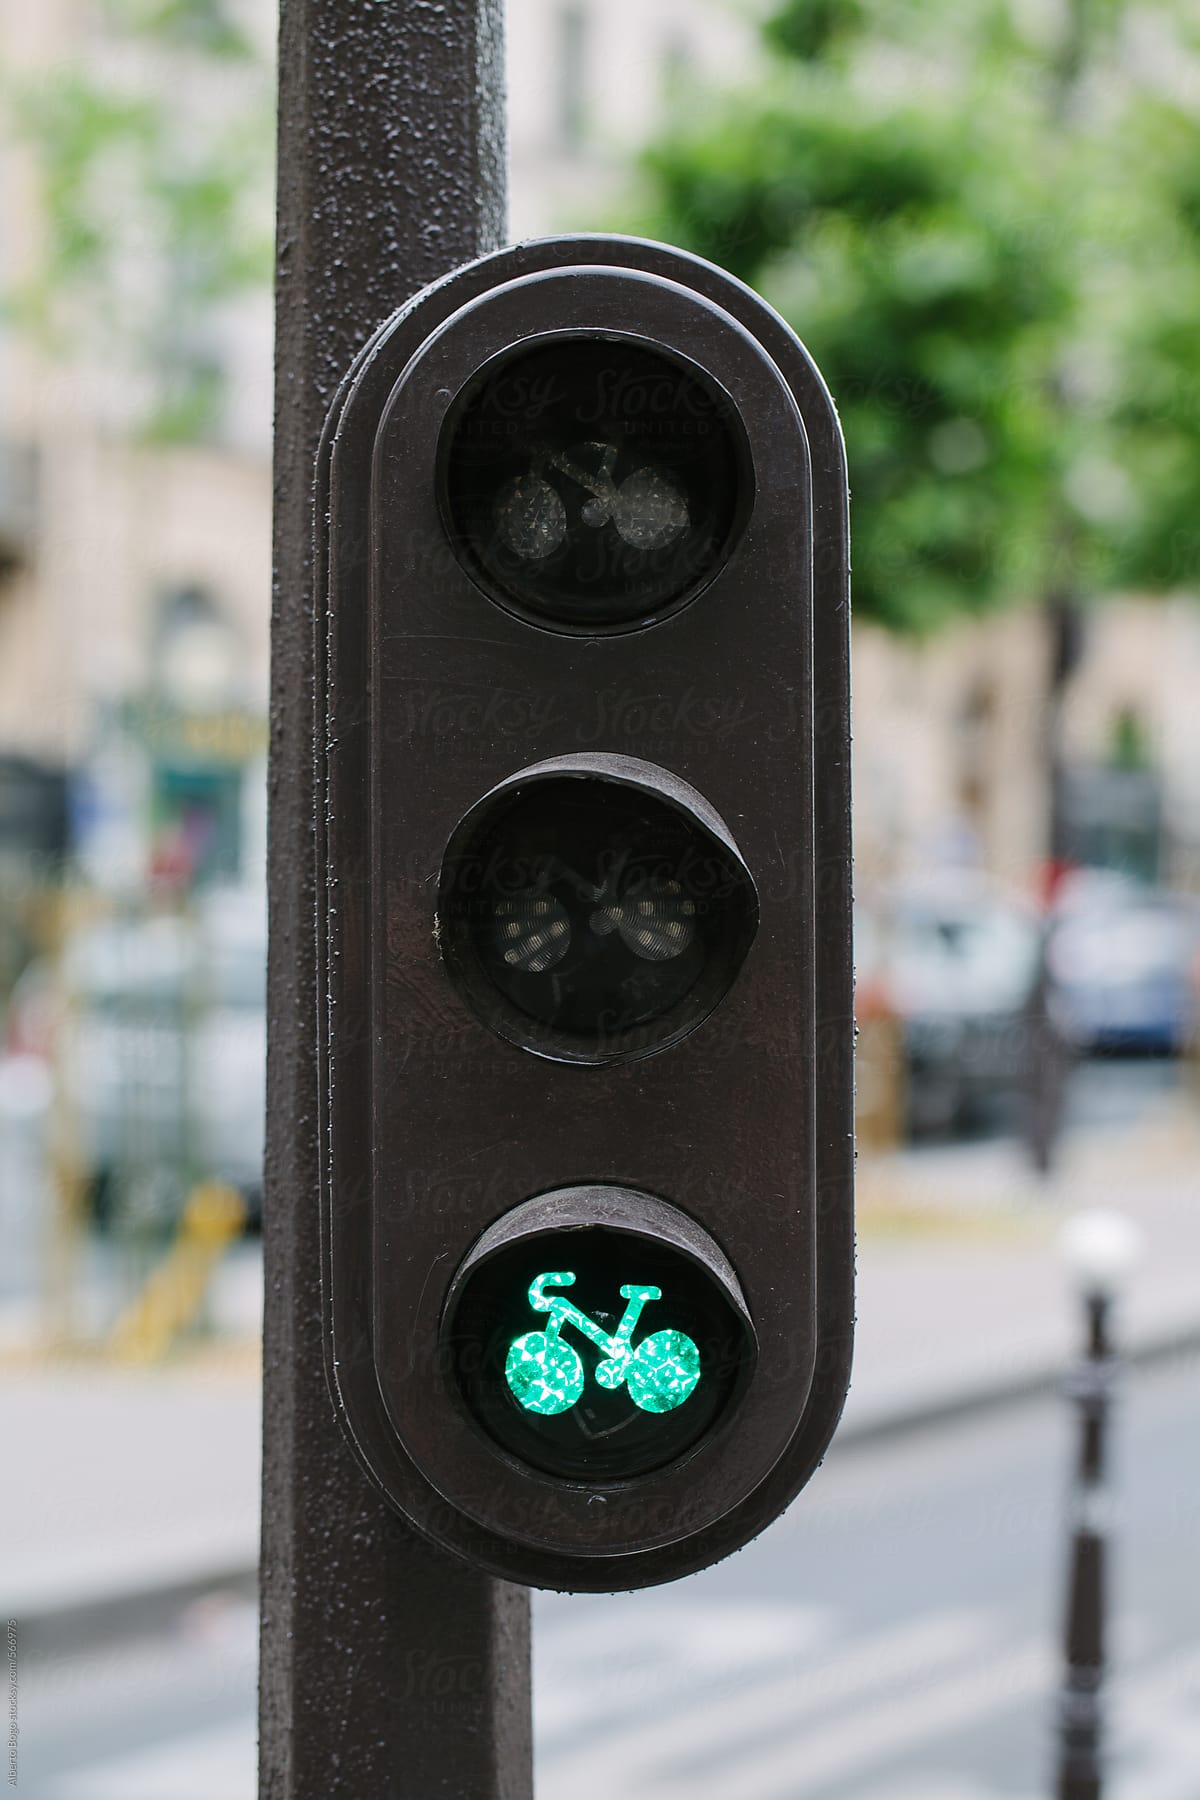 Green traffic light for cyclists